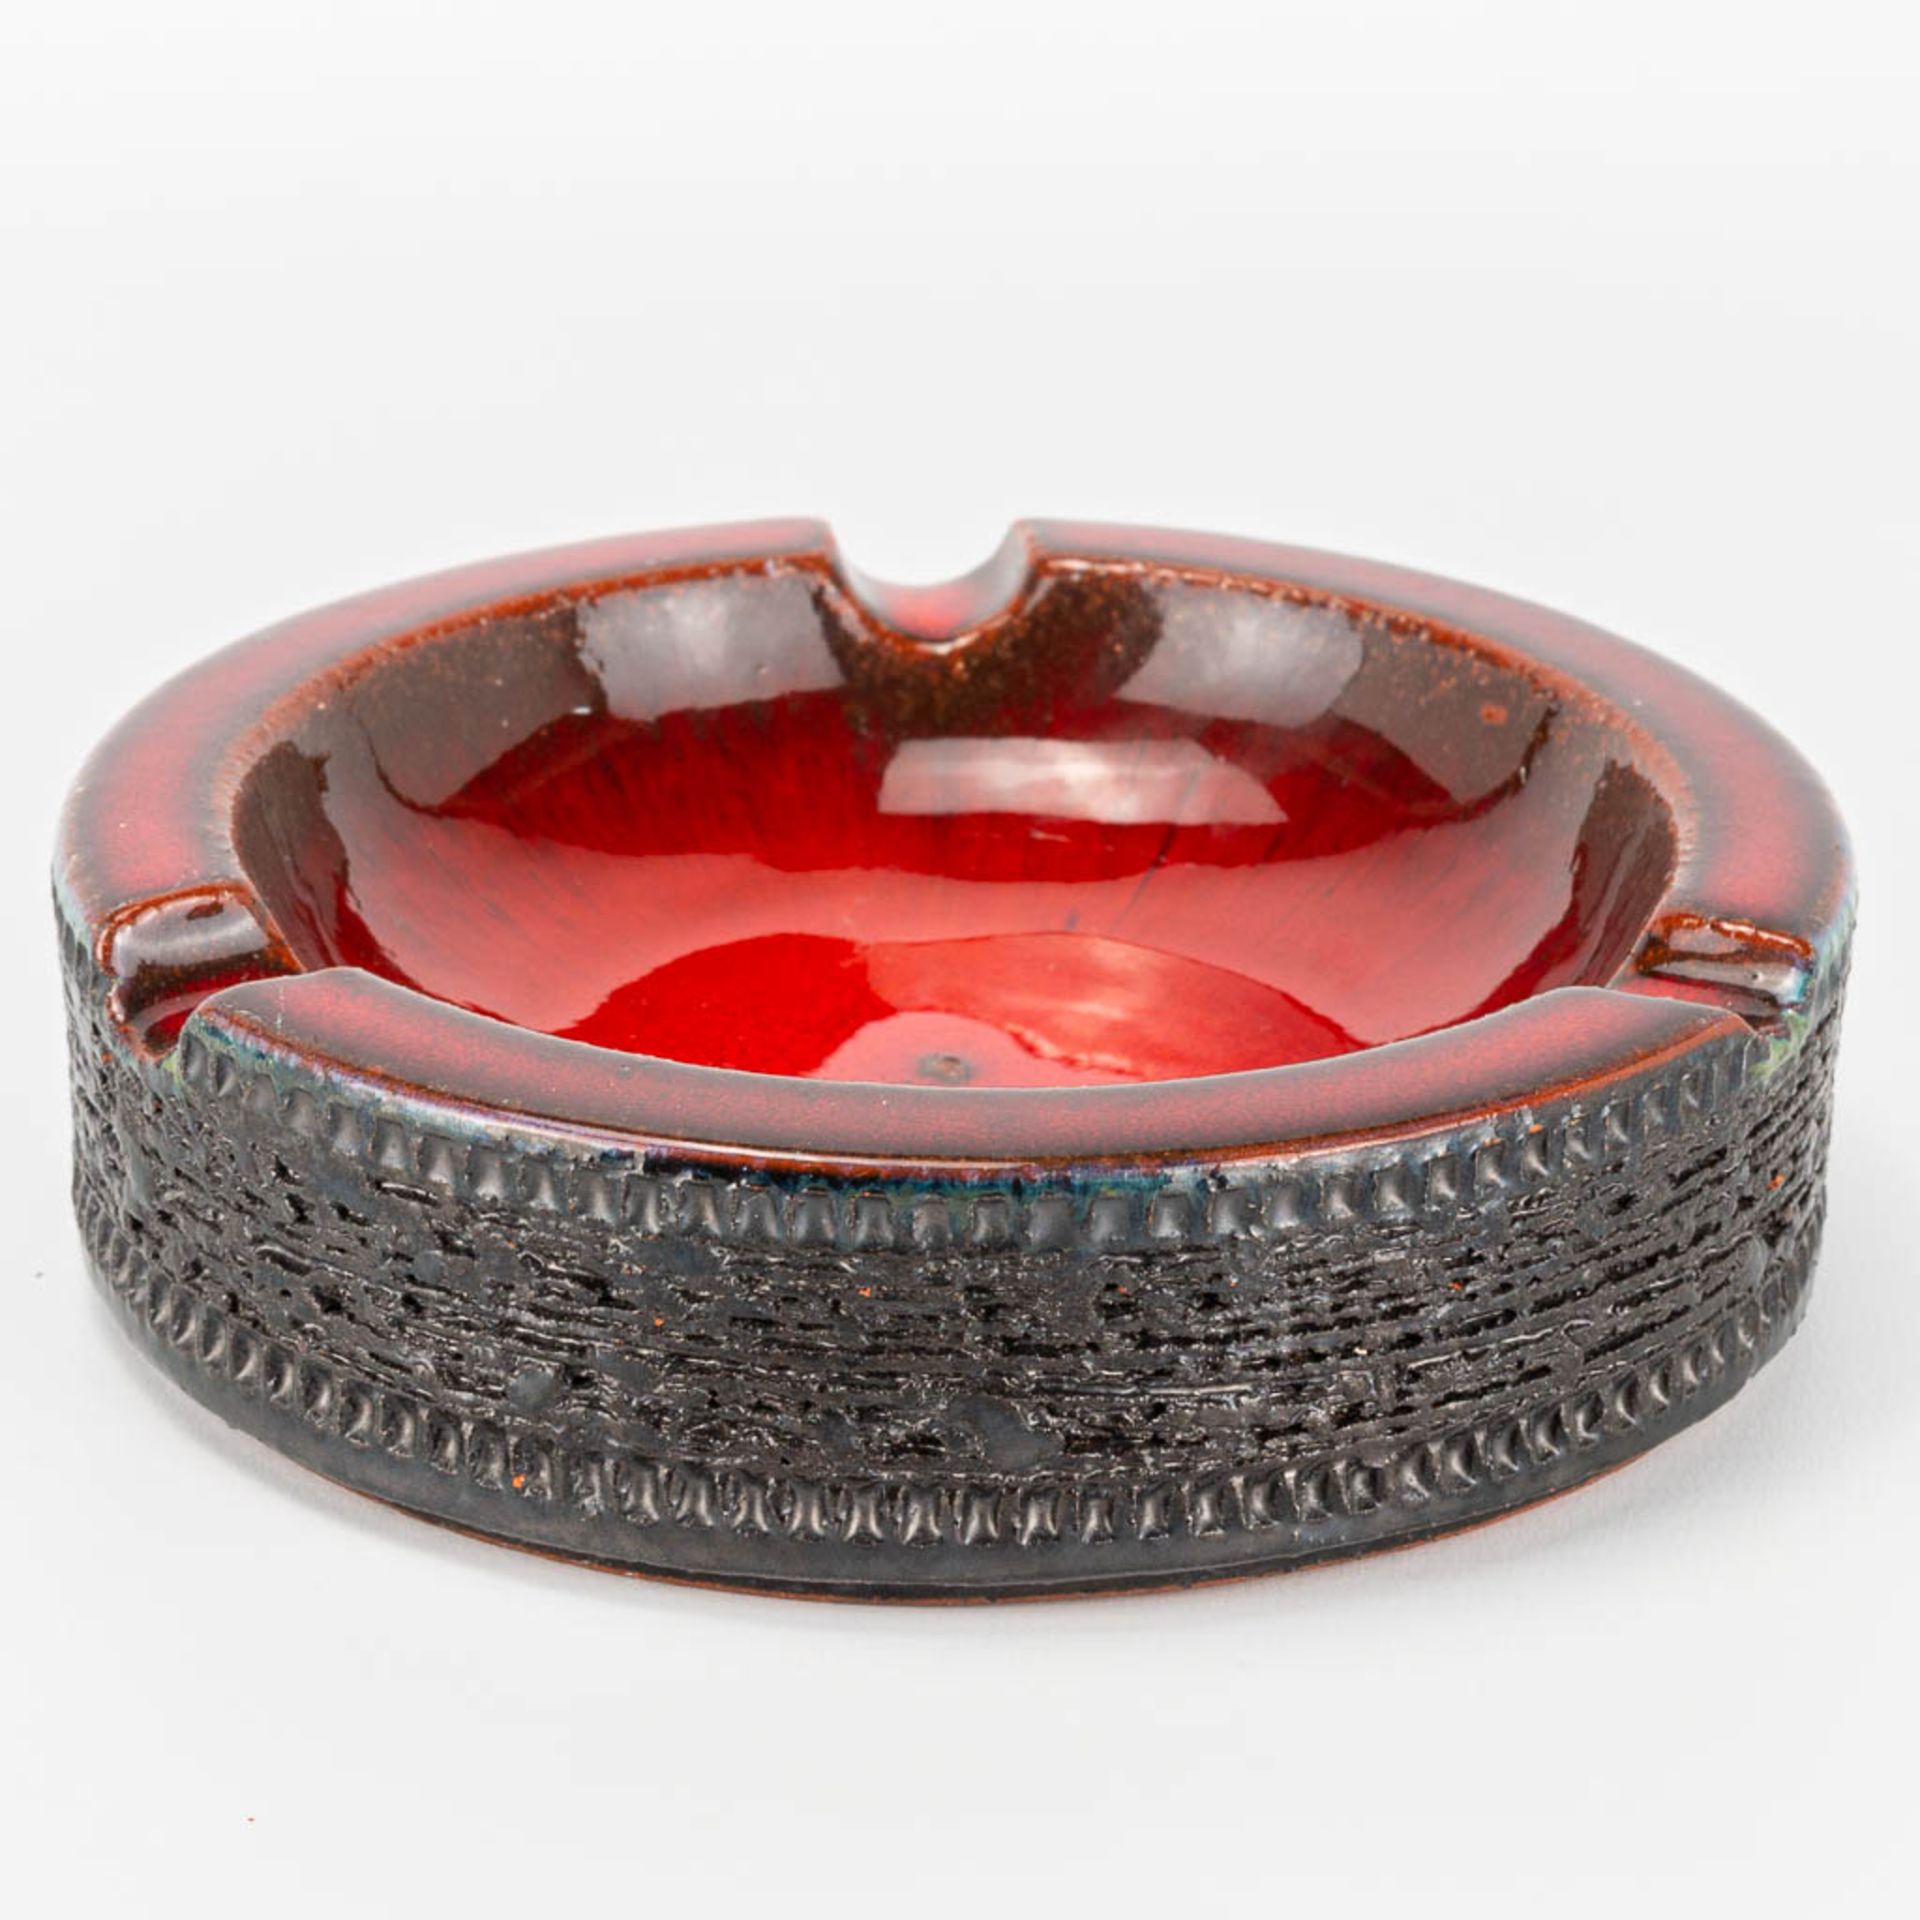 Rogier VANDEWEGHE (1923-2020) A collection of 2 ashtrays made of red glazed ceramics for Amphora. Ma - Image 10 of 19